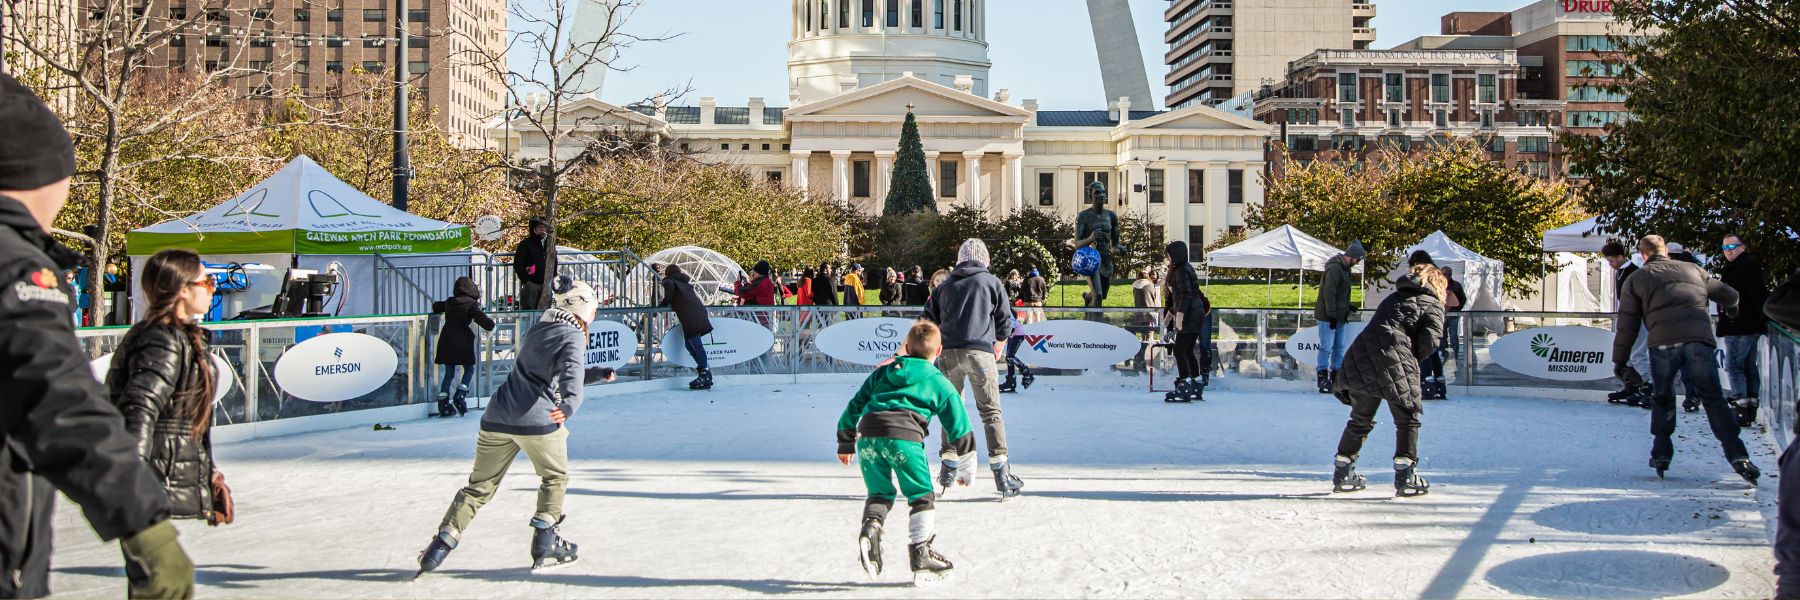 St Louis Christmas Events and Holiday Fun in St. Louis